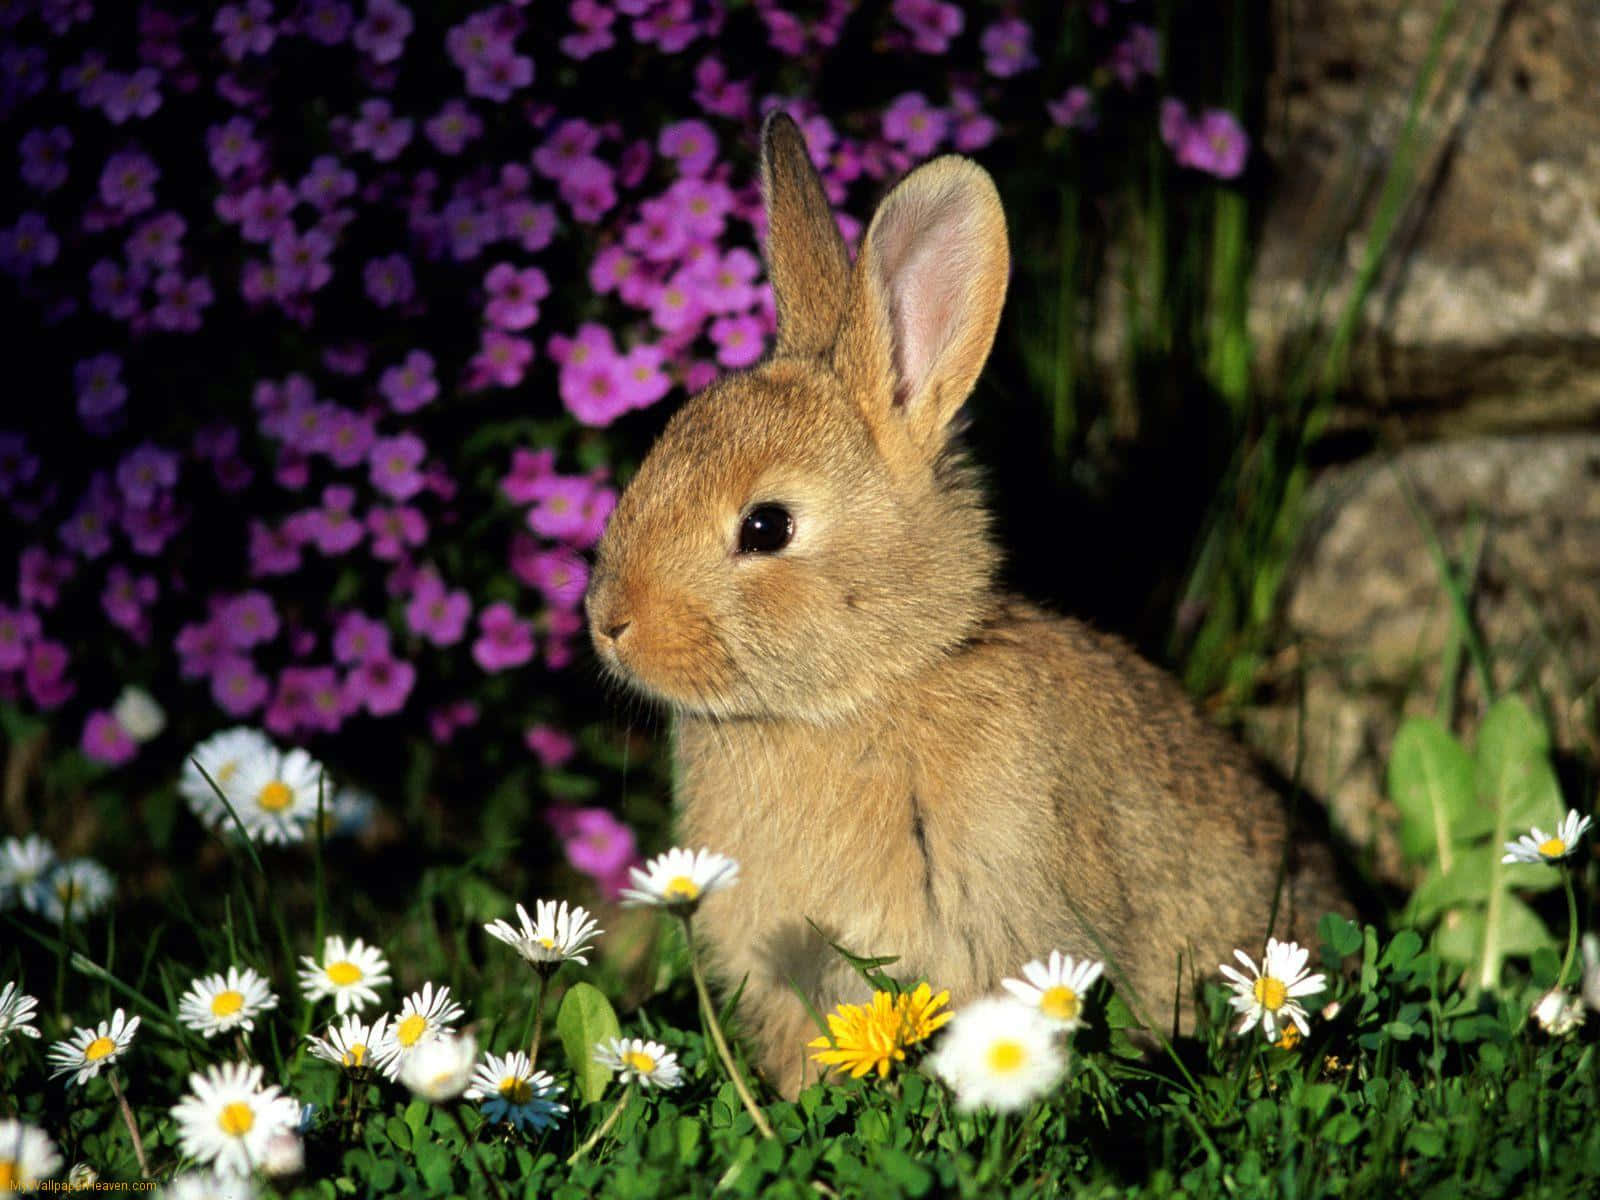 Explore the joy of nature with this playful Bunny